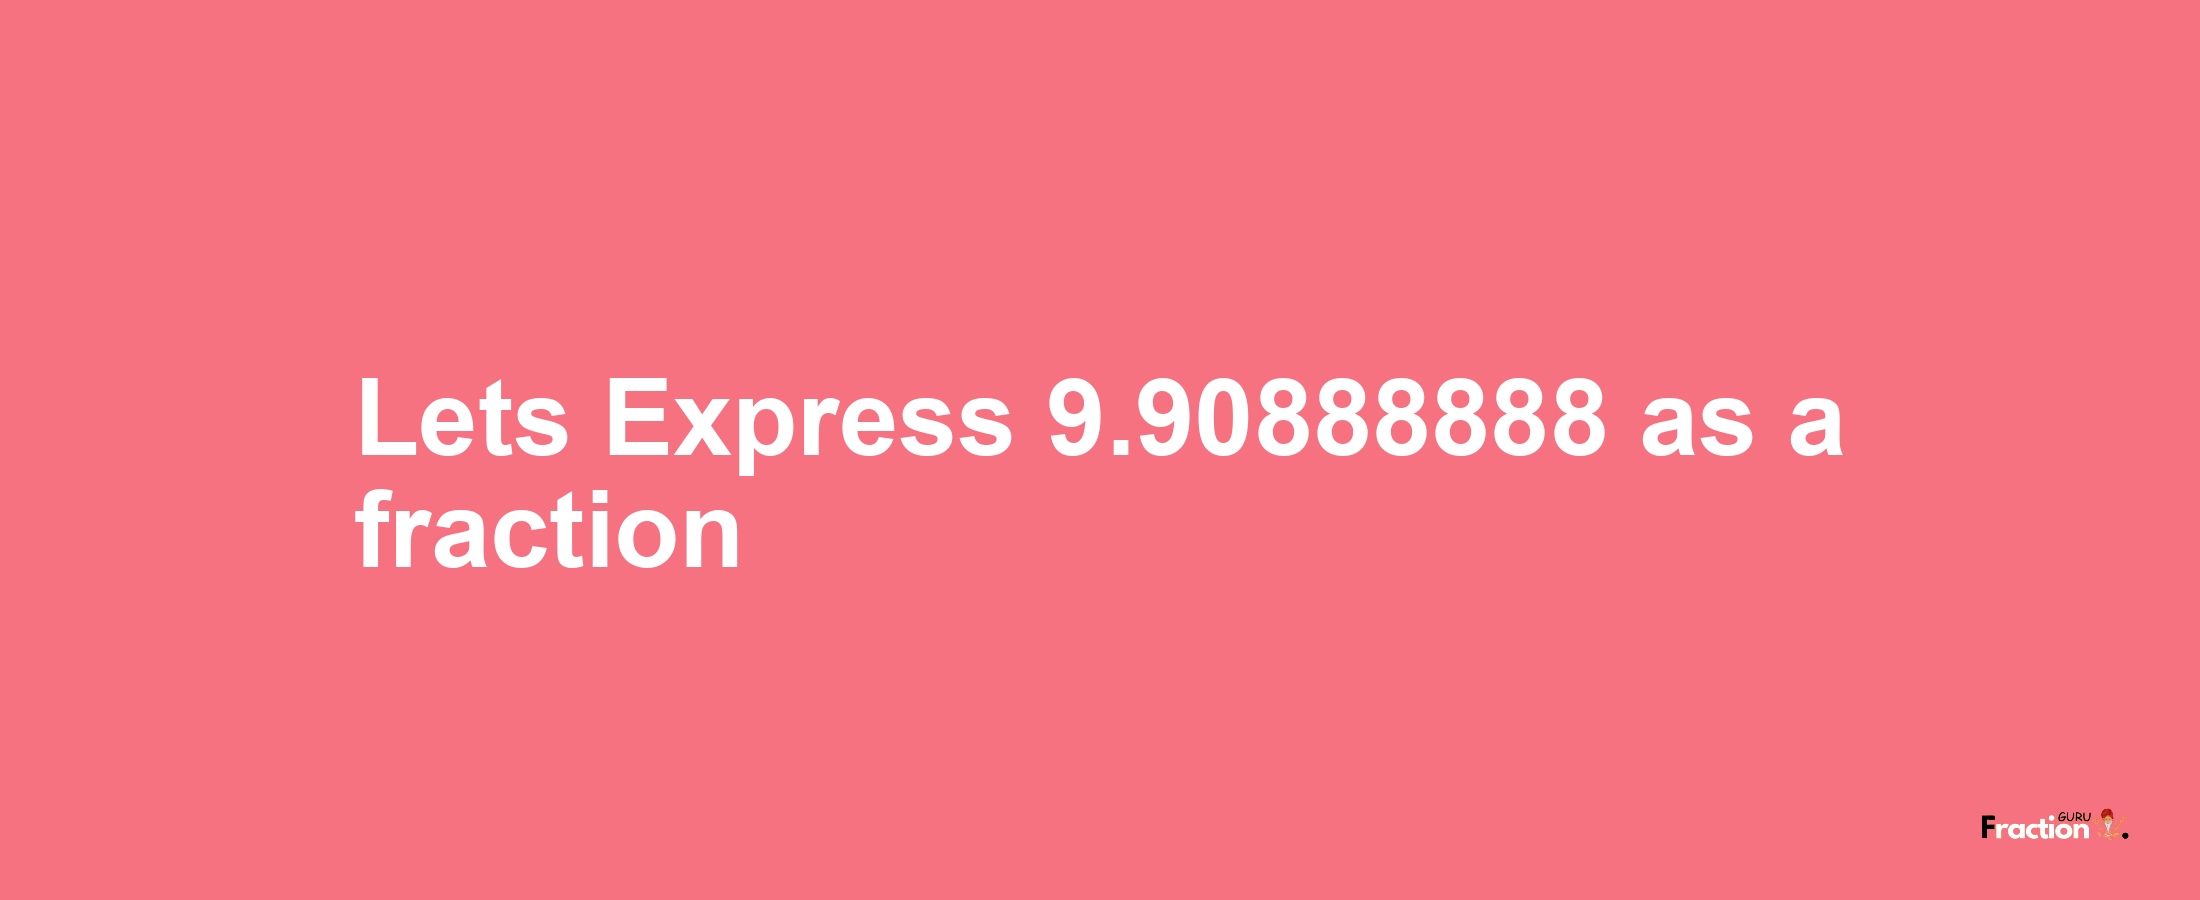 Lets Express 9.90888888 as afraction